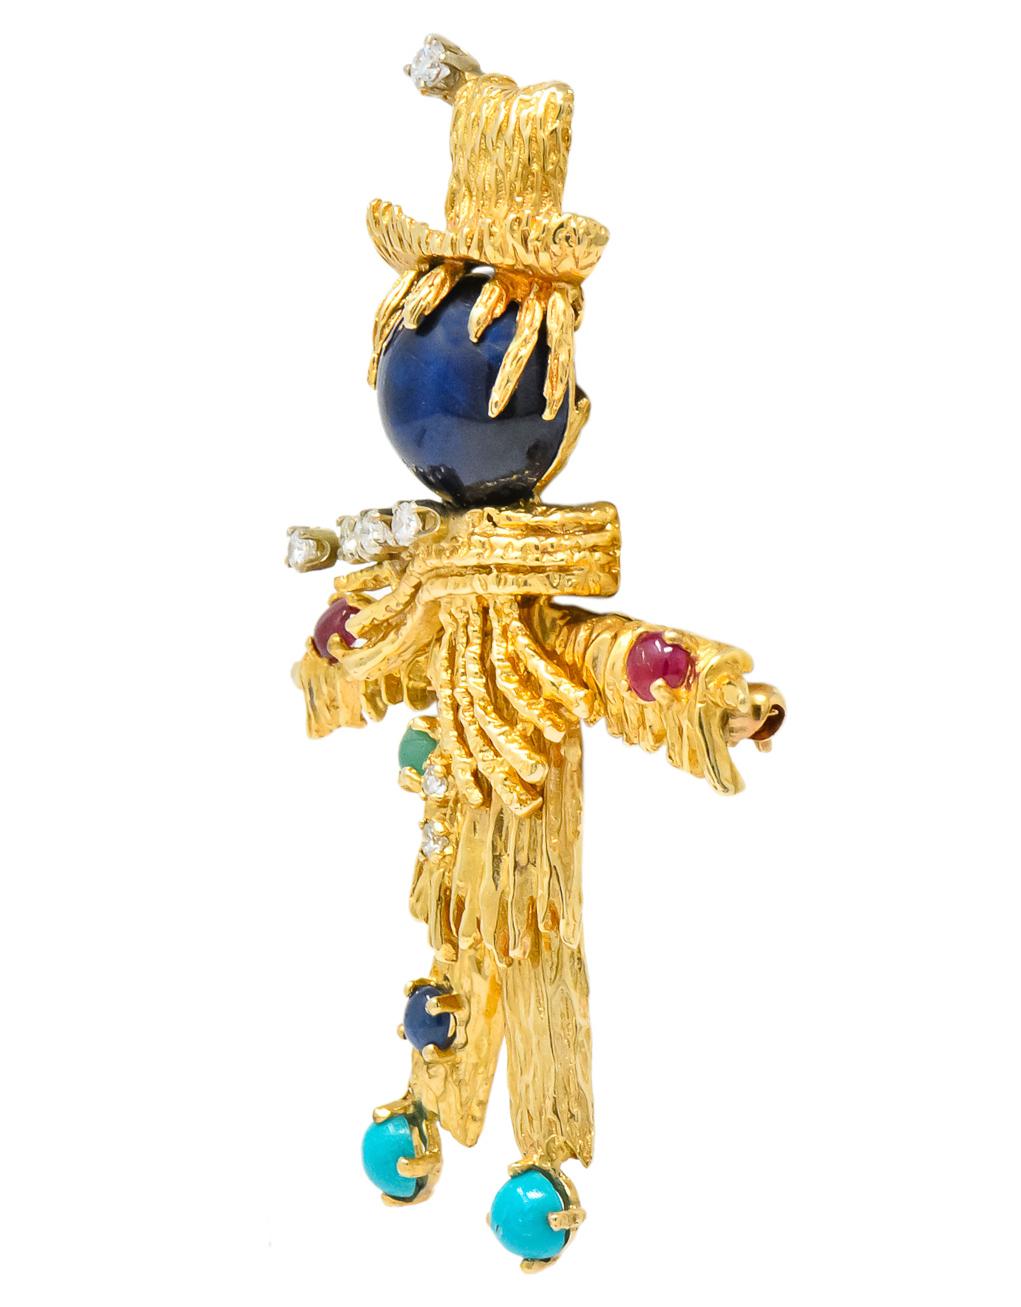 Articulated scarecrow designed as a round cabochon cut sapphire head measuring 11.8 mm with textured gold clothing, hat, and scarf

Set throughout by round cabochon cut emerald, sapphire, ruby, and turquoise

Accented by round brilliant cut